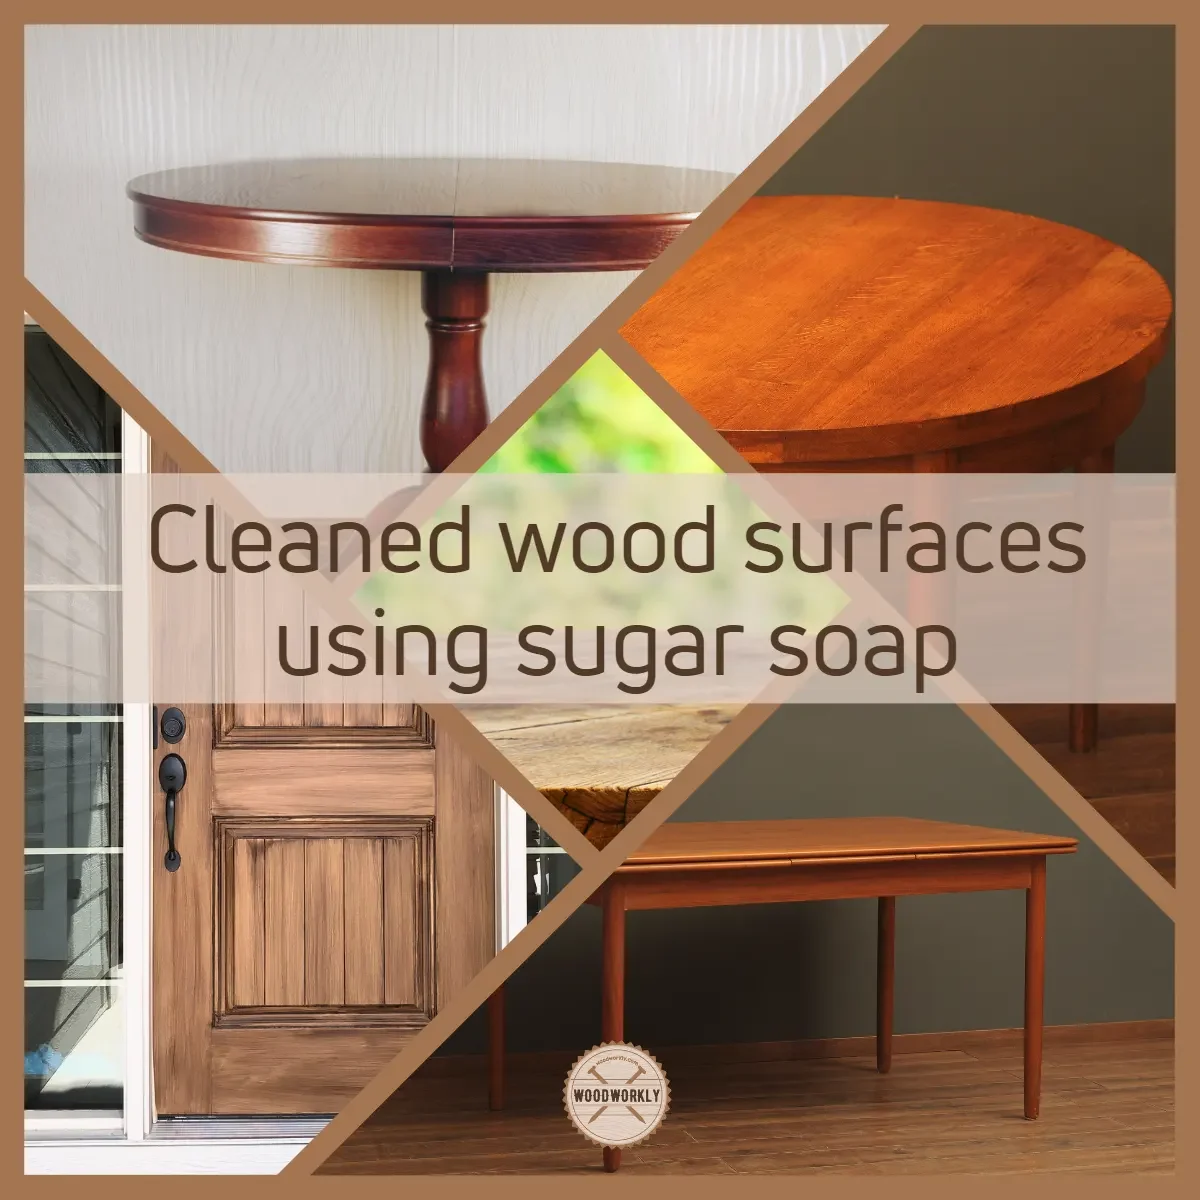 Cleaned wood surfaces using sugar soap